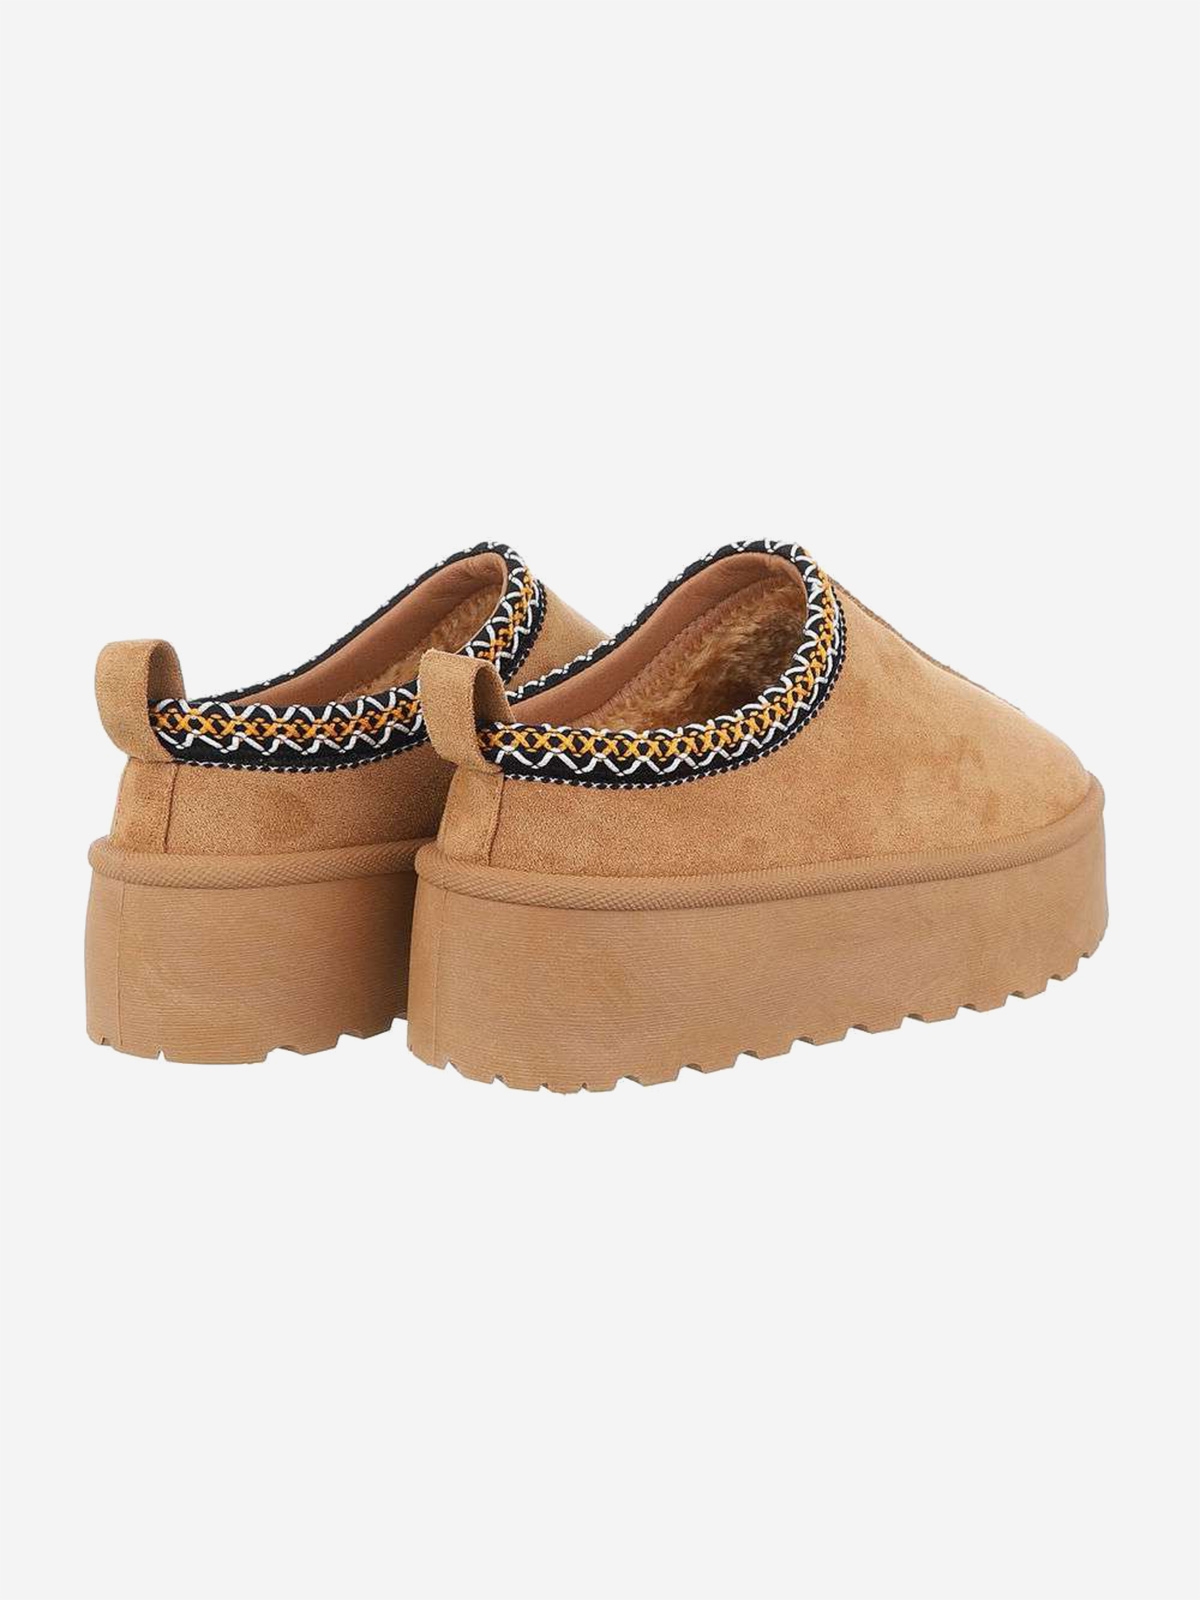 UGG style women's slippers with platform in camel